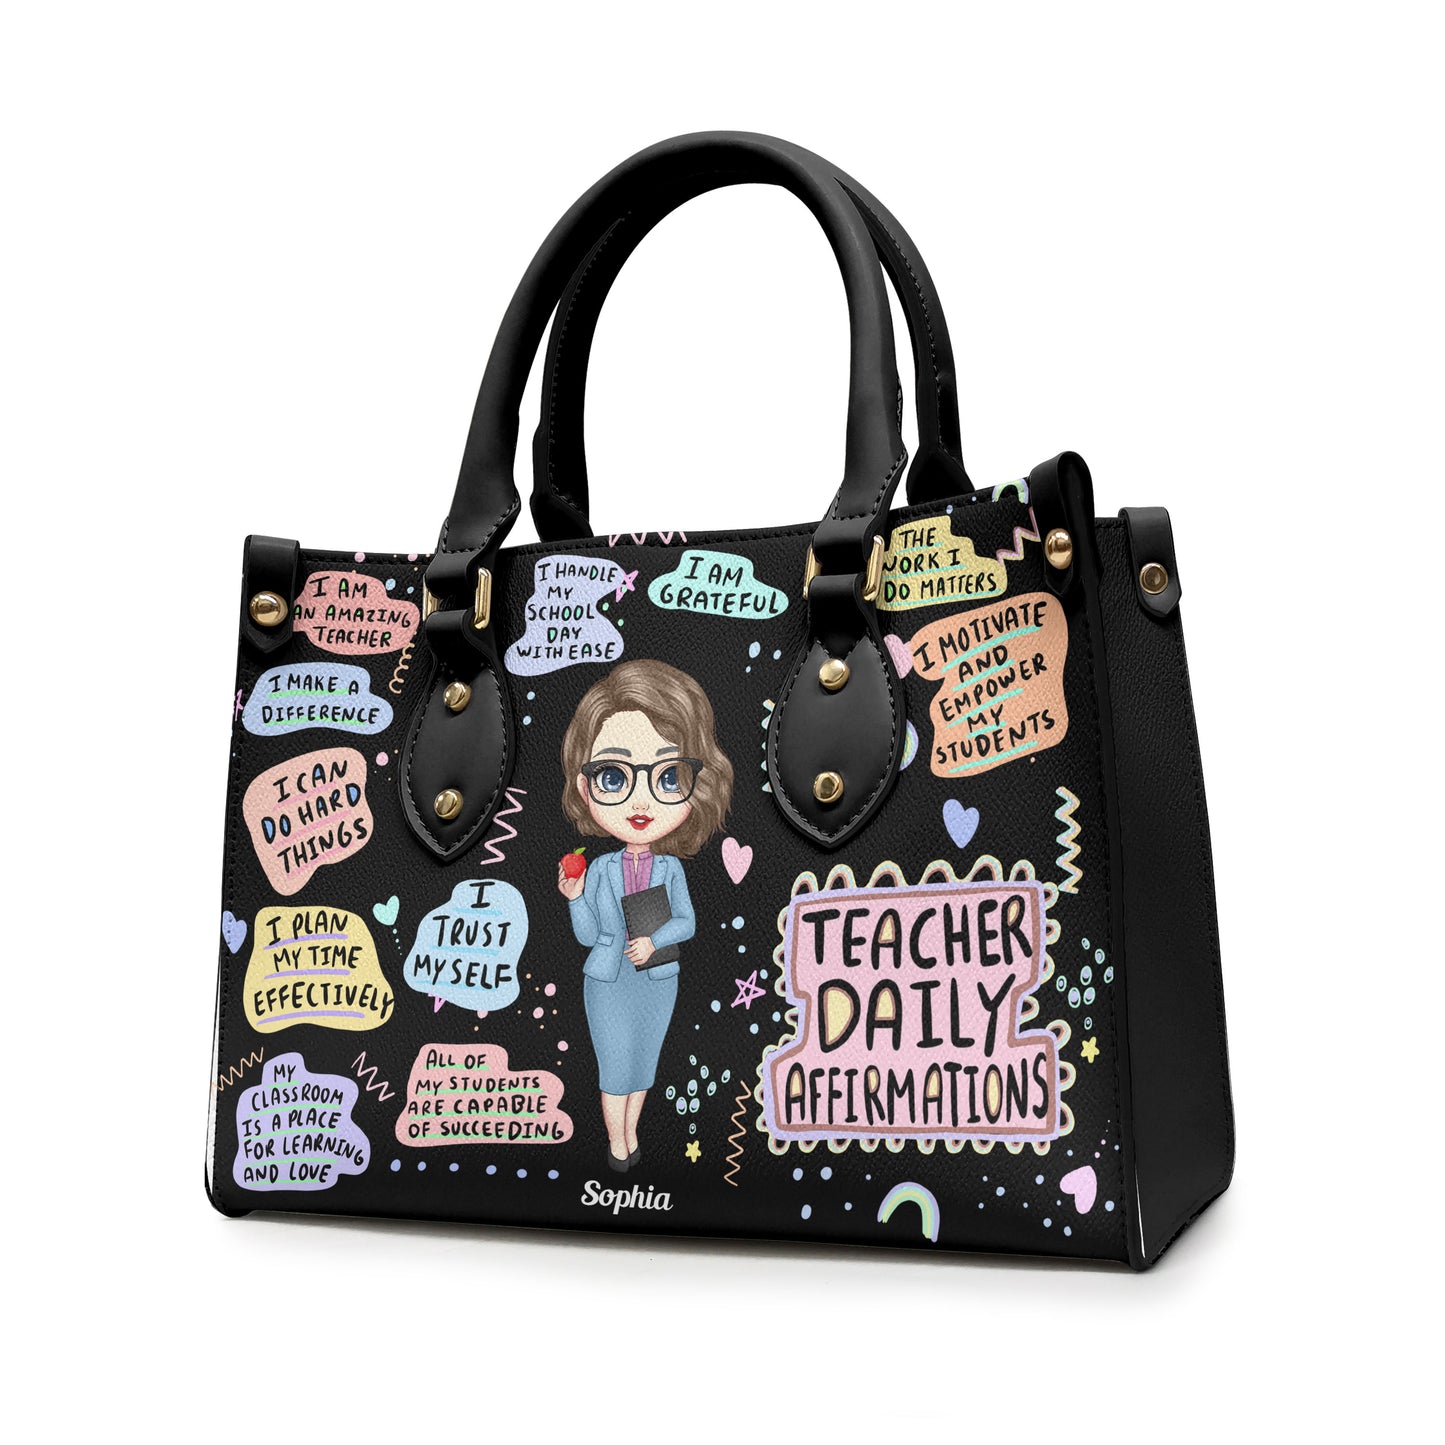 Teacher Daily Affirmations - Personalized Leather Bag